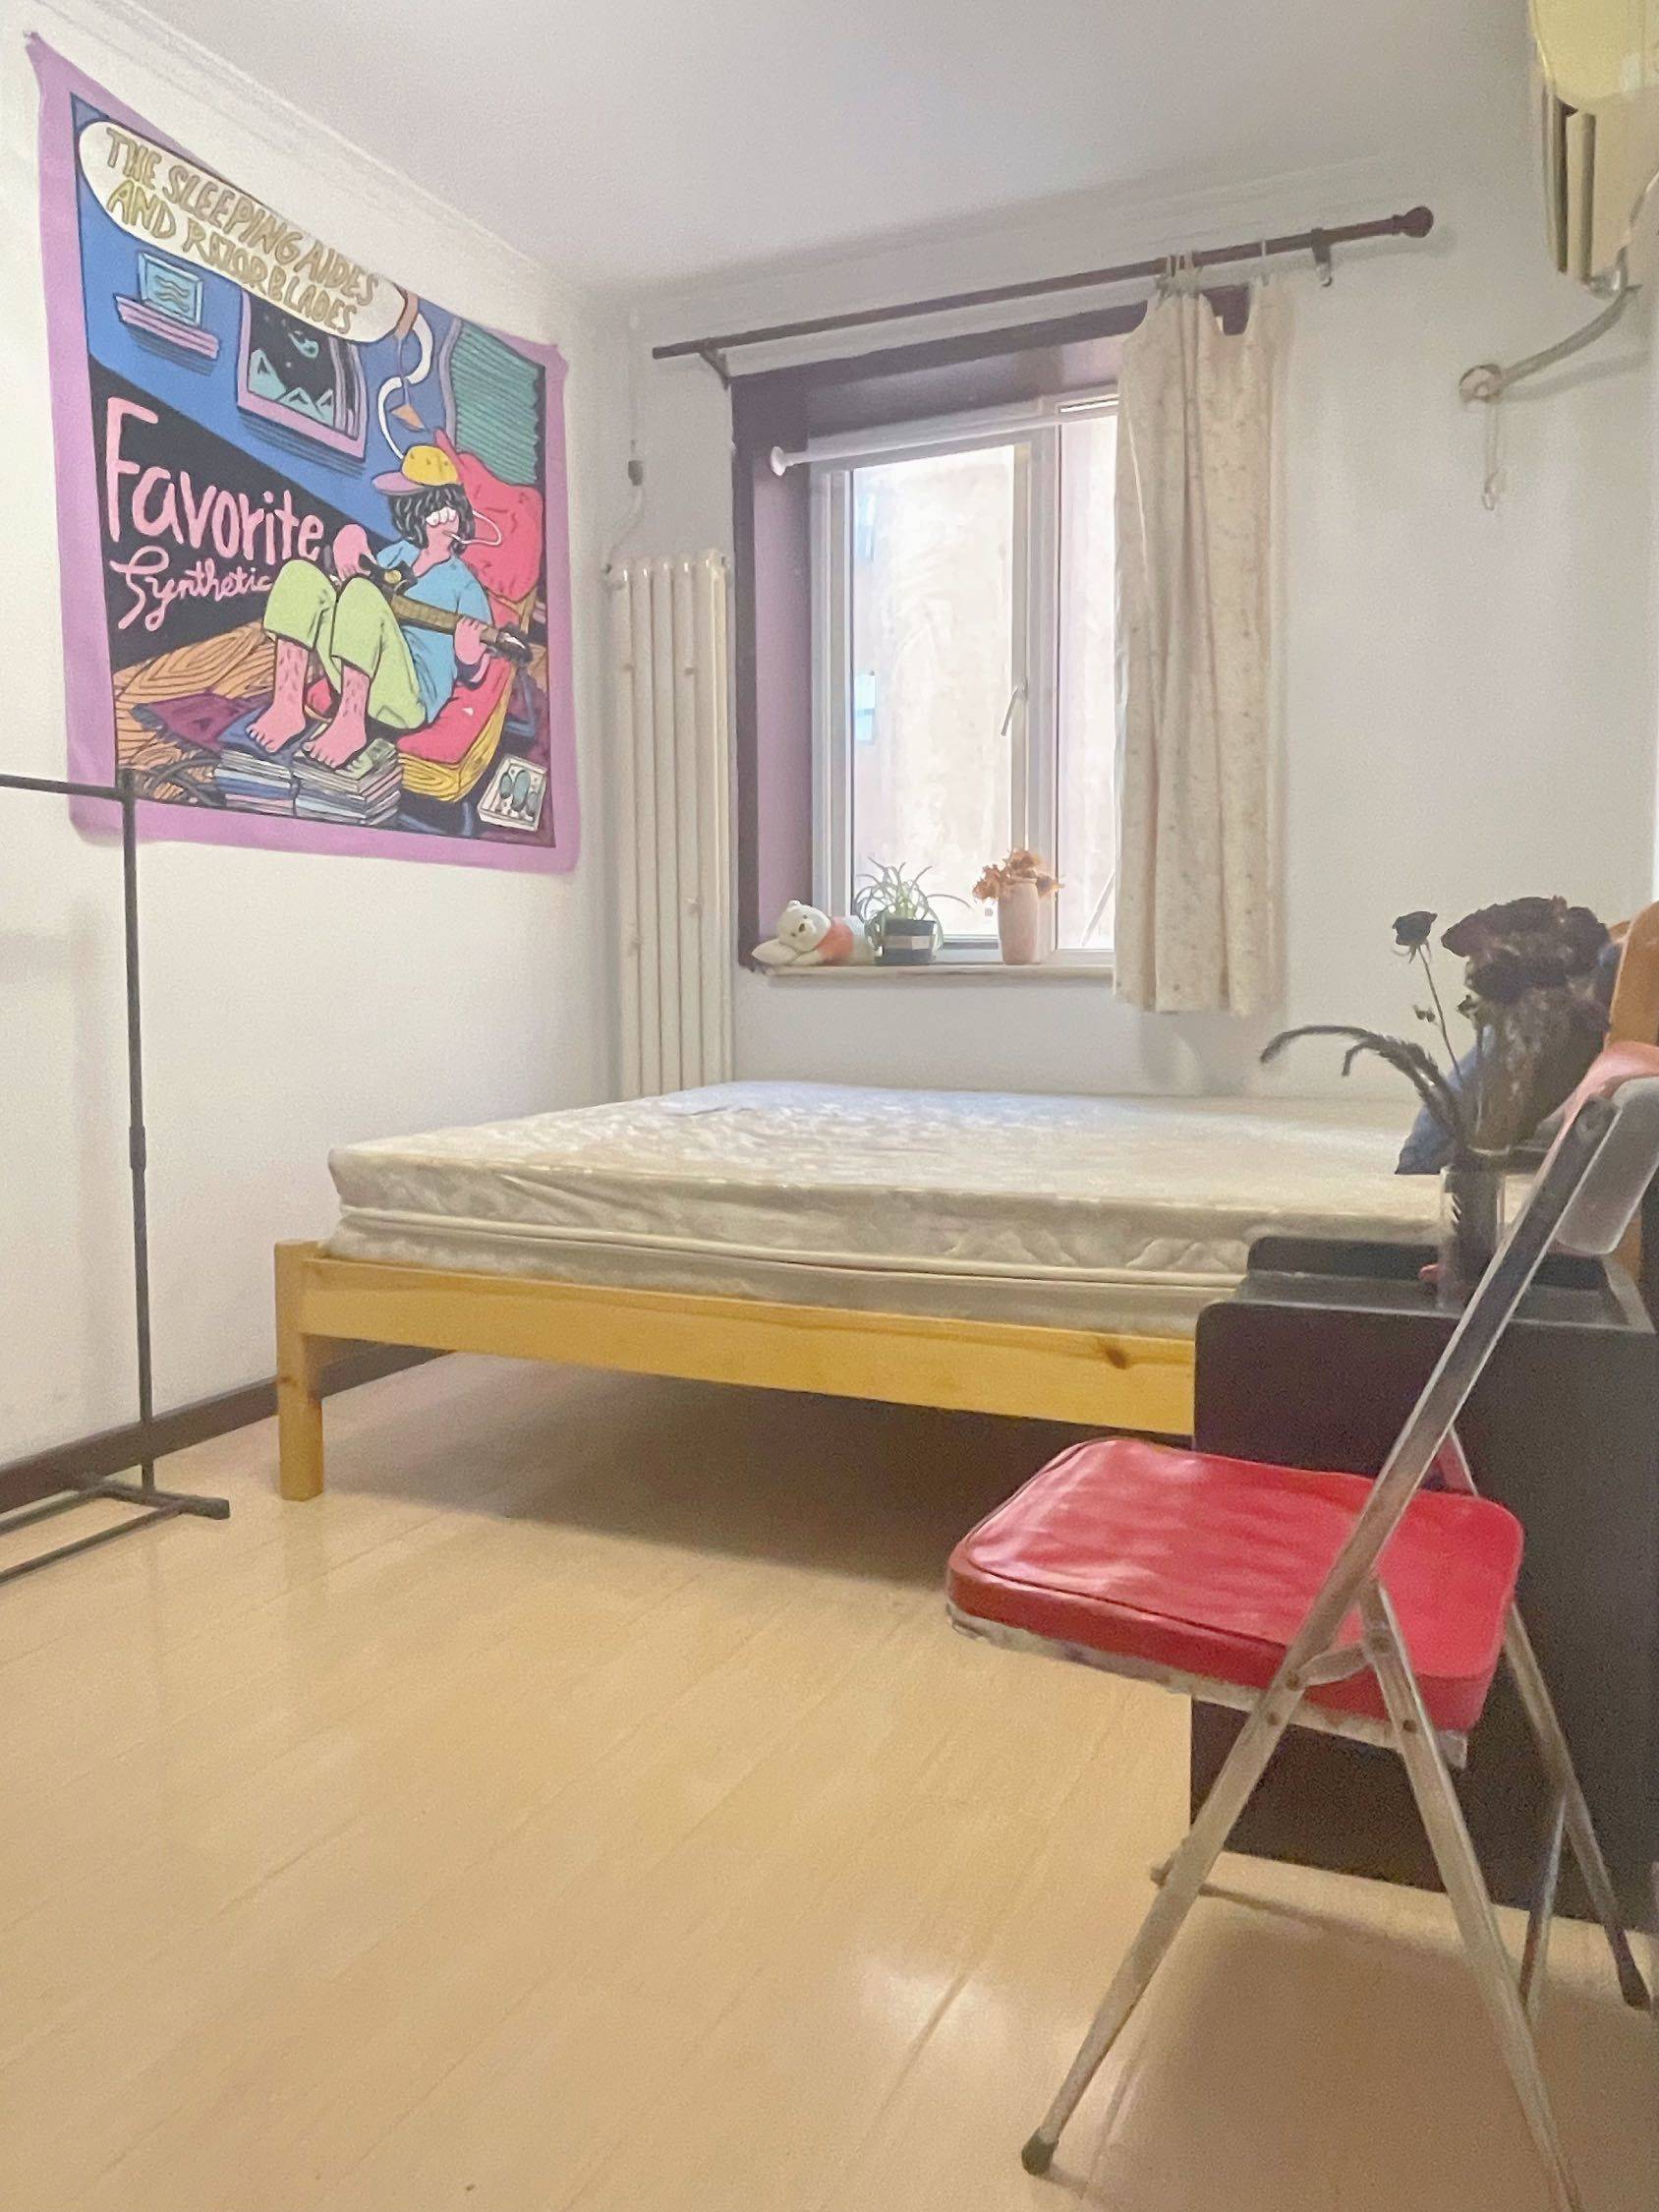 Beijing-Chaoyang-Cozy Home,Clean&Comfy,Chilled,LGBTQ Friendly